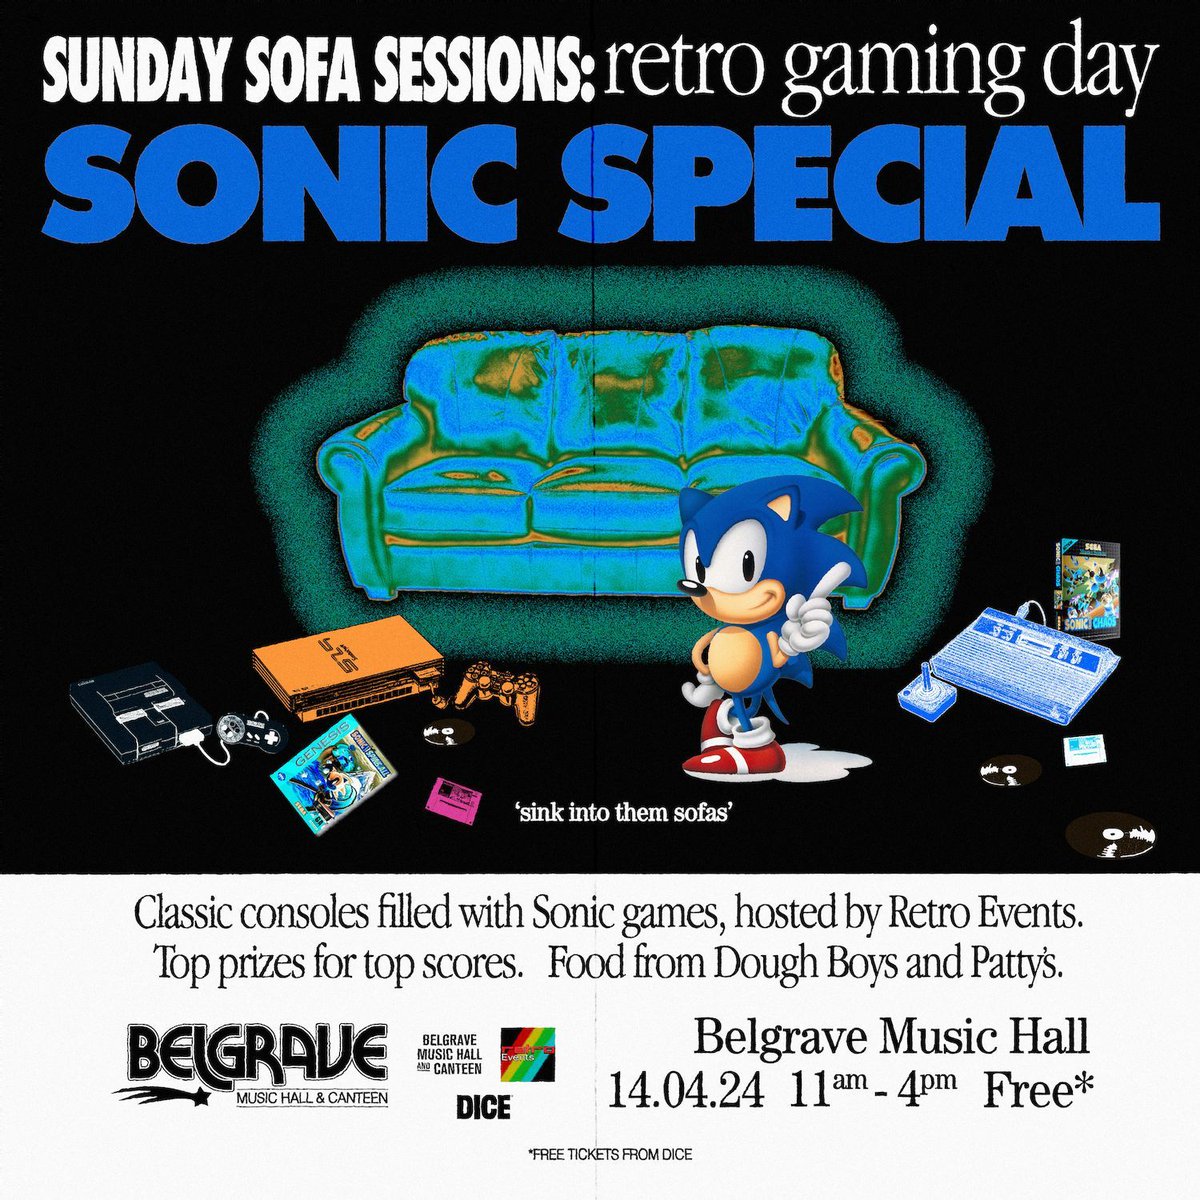 A gentle reminder that our pals over at Retro Events are returning to the The Music Hall, next week for a Sonic special, featuring Sonic the Hedgehog games from over the years! Free tickets available on @dicefm. buff.ly/3vuCOTo